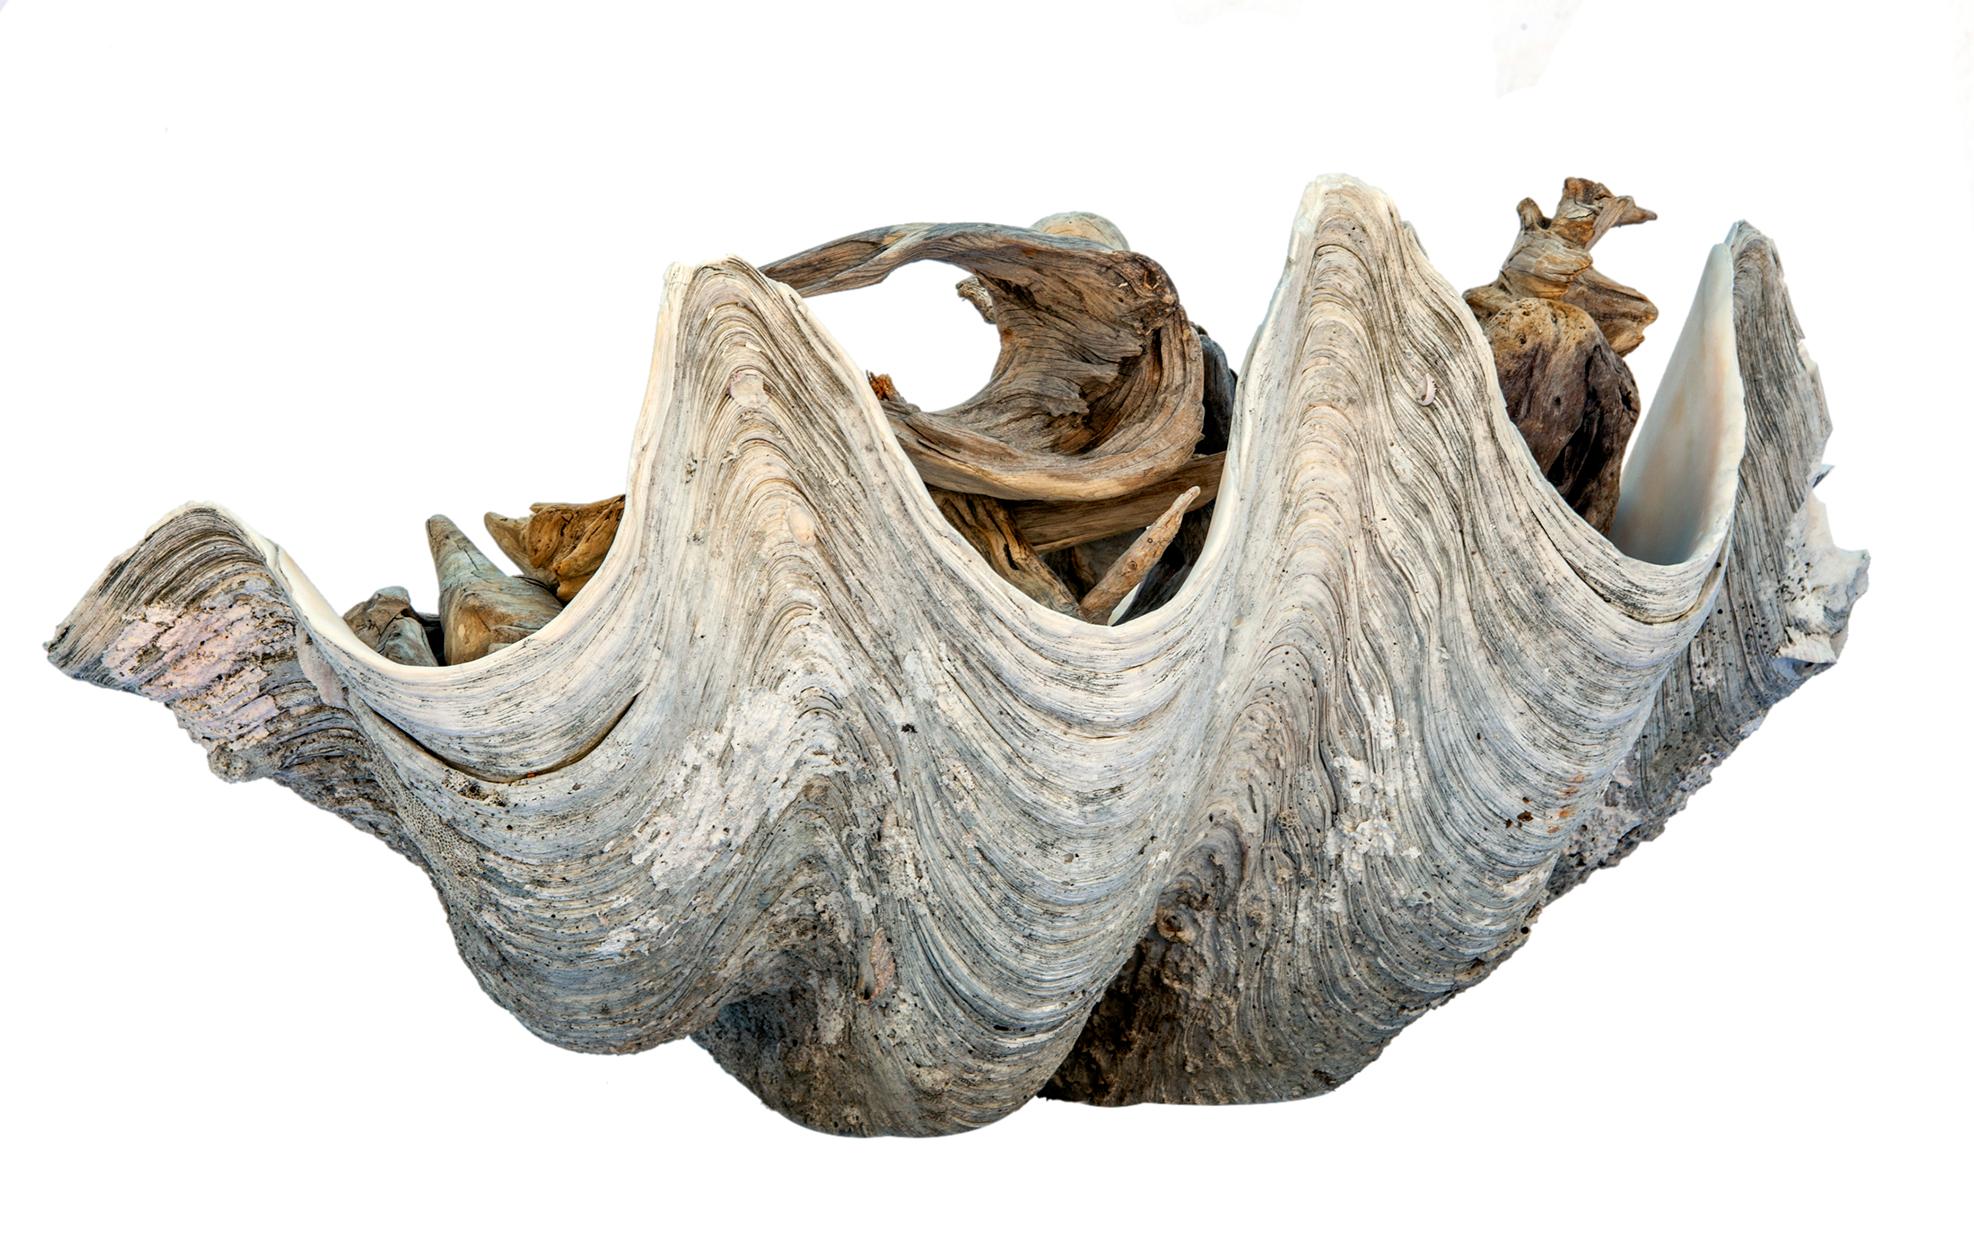 Indonesian Enormous South Pacific Clam Shell Loaded with Vintage Driftwood For Sale